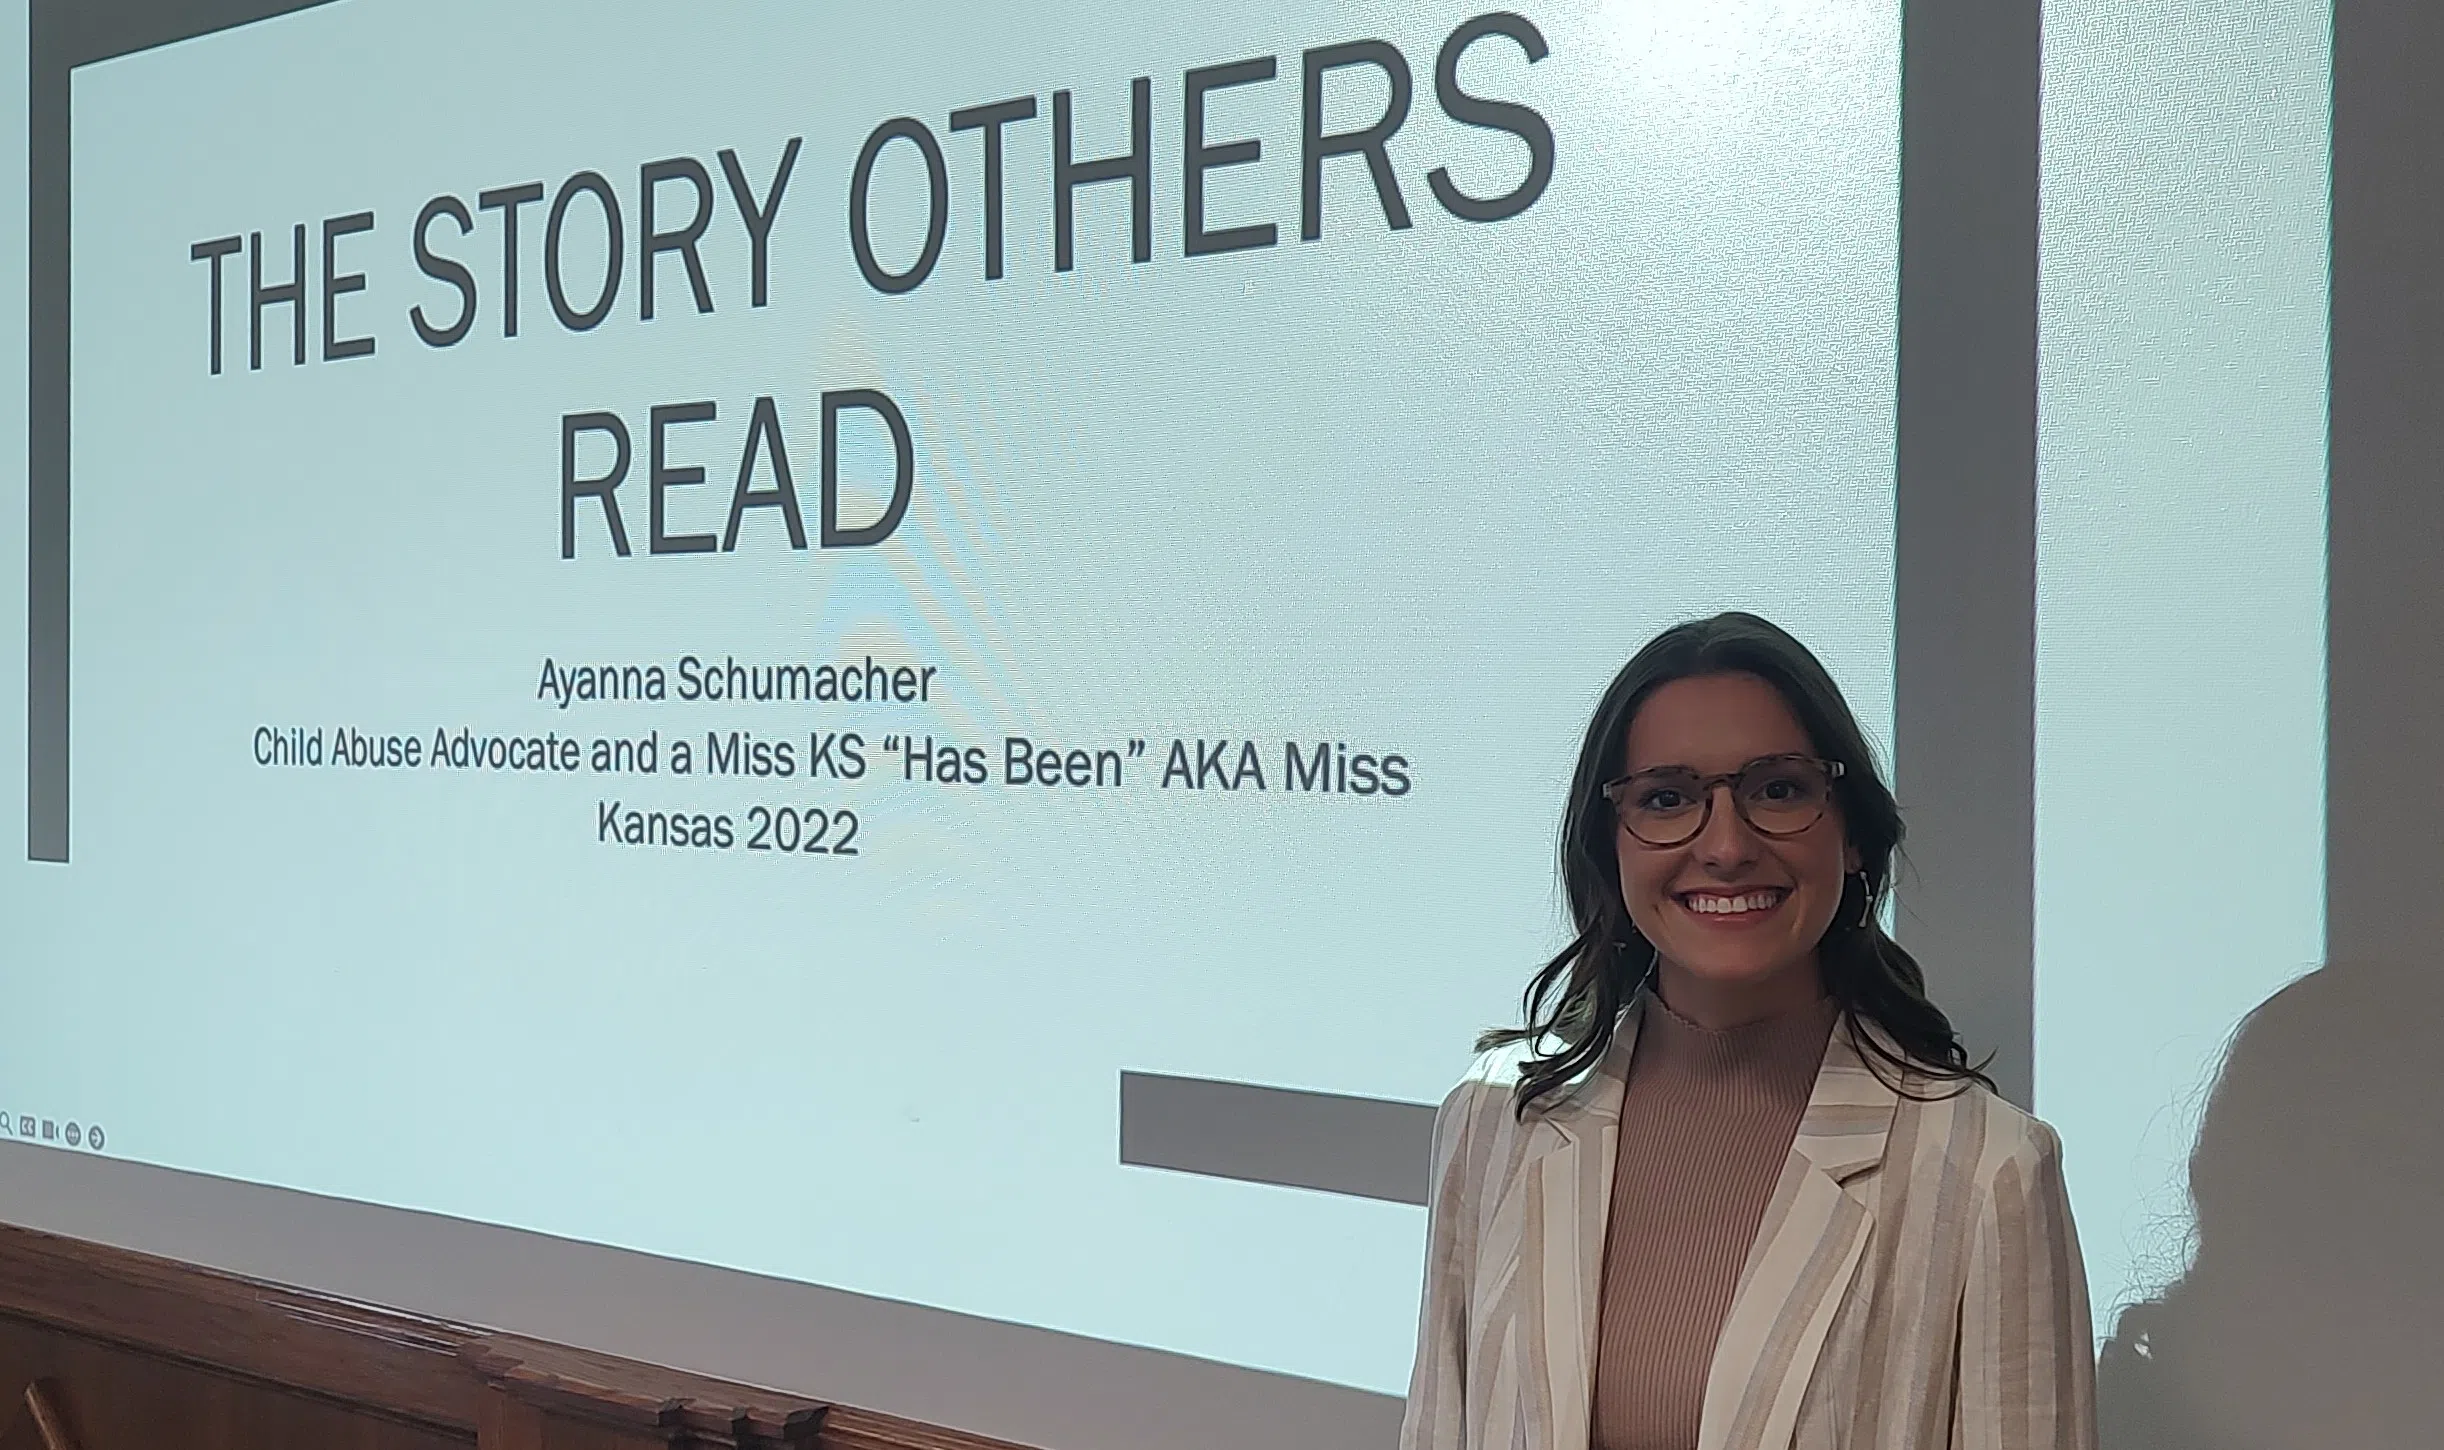 'Create connections:' Former Miss Kansas speaks to the power of positive connectivity during presentation in Emporia Thursday evening